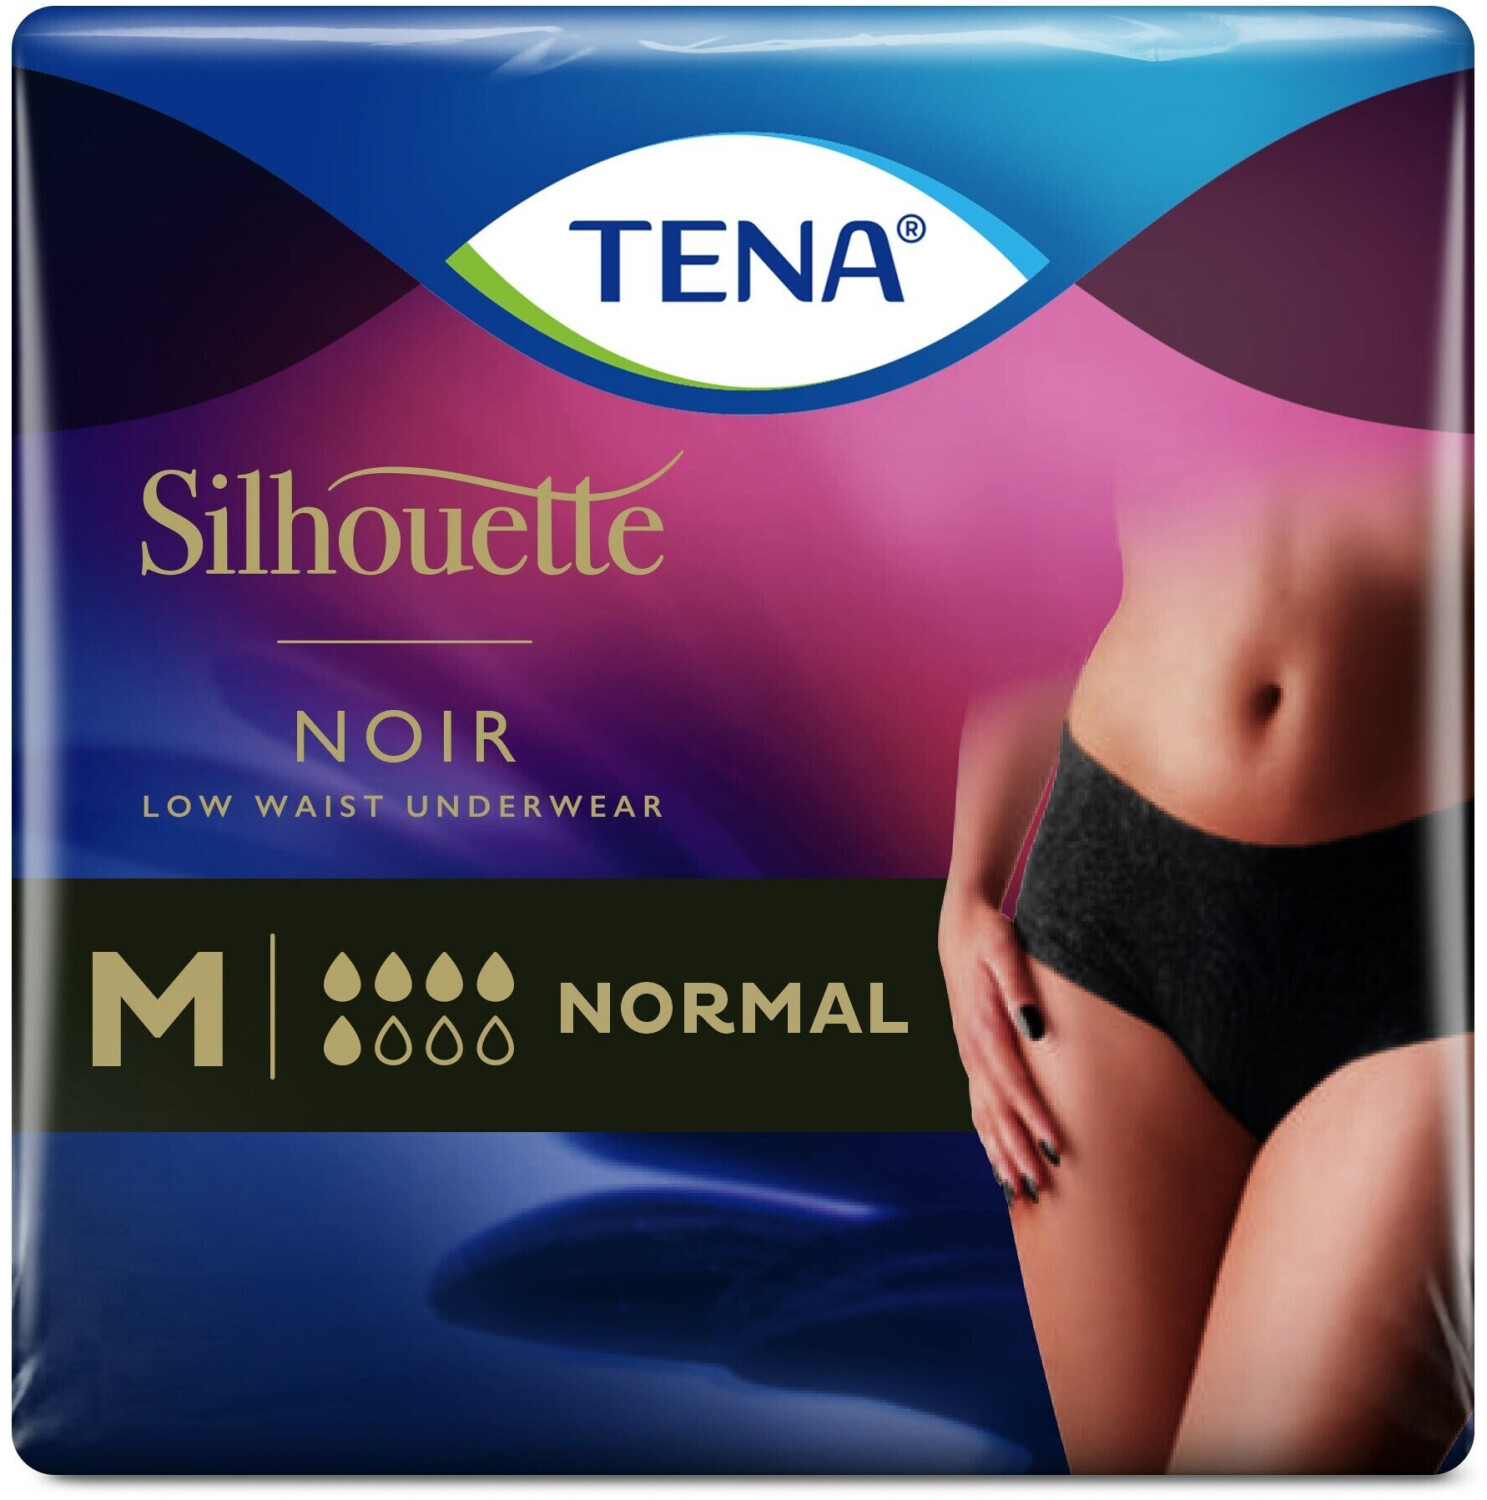 Buy Tena Silhouette Noir Slips Size M (10 pcs) from £8.50 (Today) – Best  Deals on